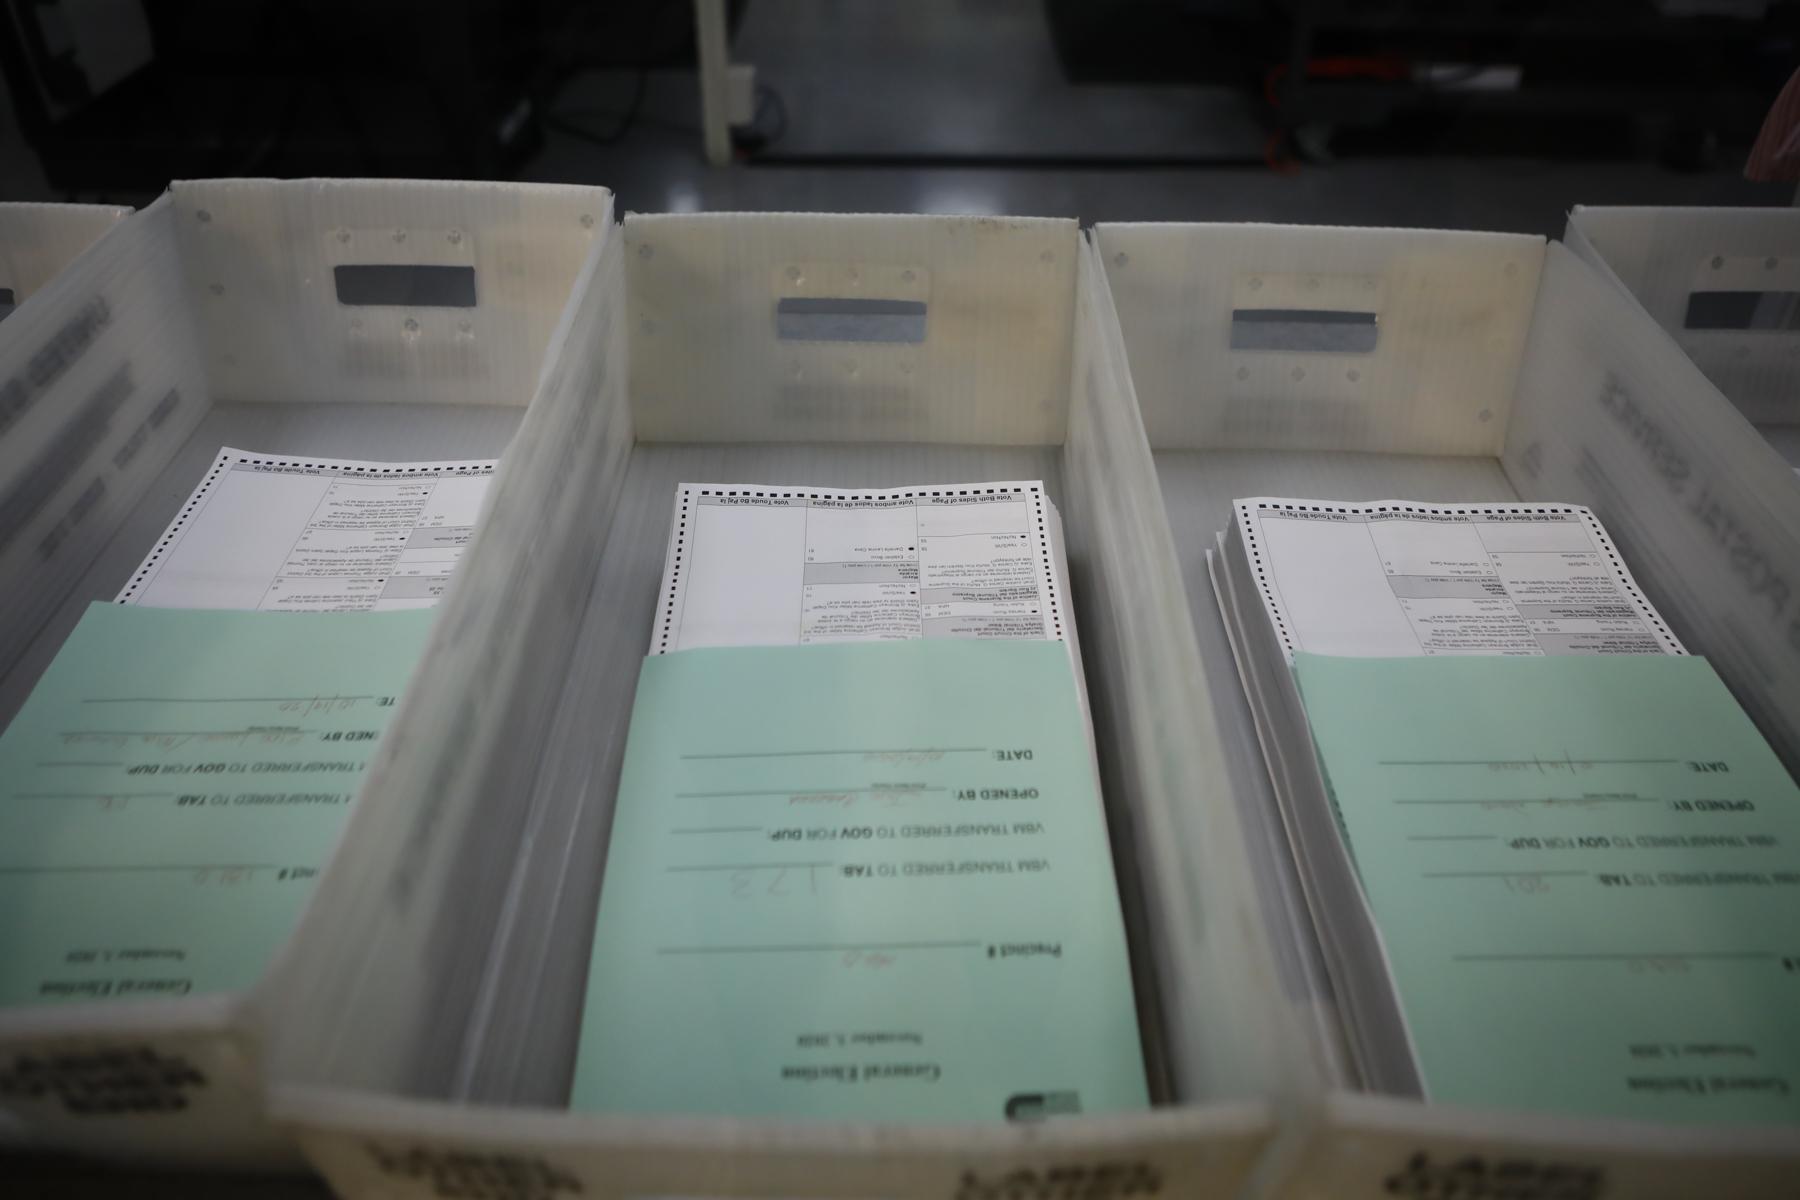 Election 2020 @ Miami, FL - Vote-by-mail ballots are seen at Miami-Dade County...